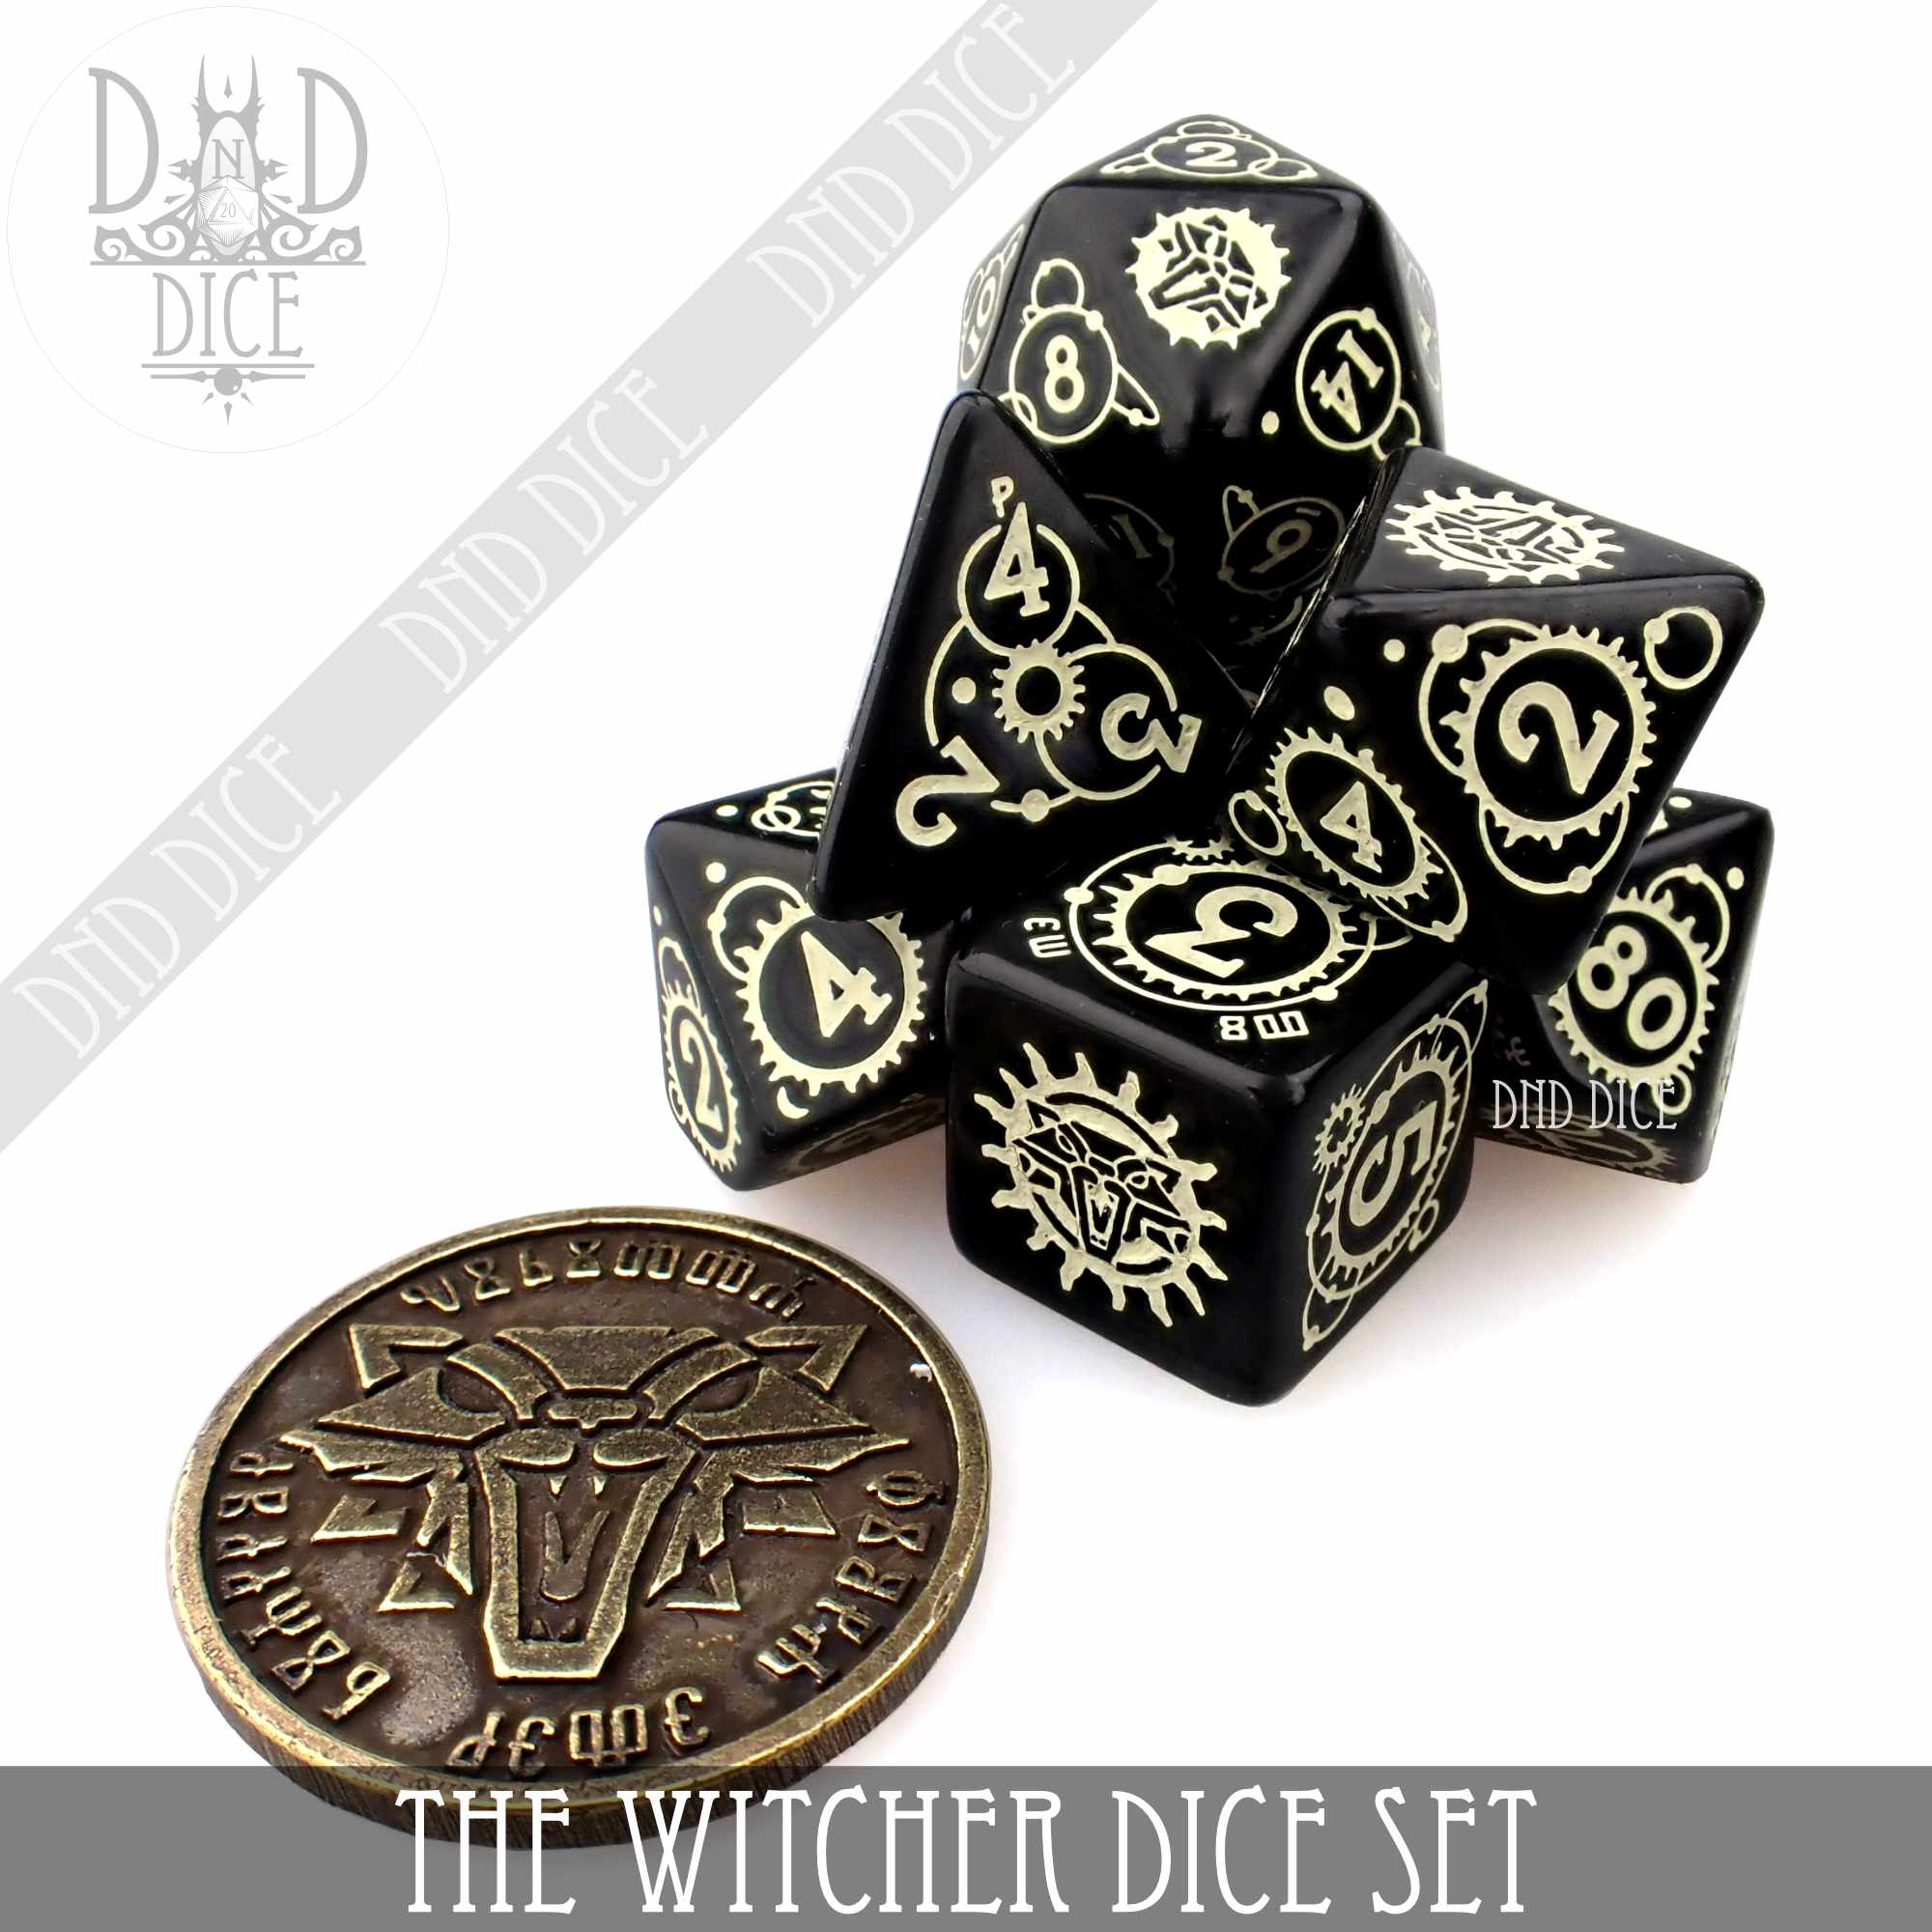 The Witcher Dice Set and Coin - Ciri